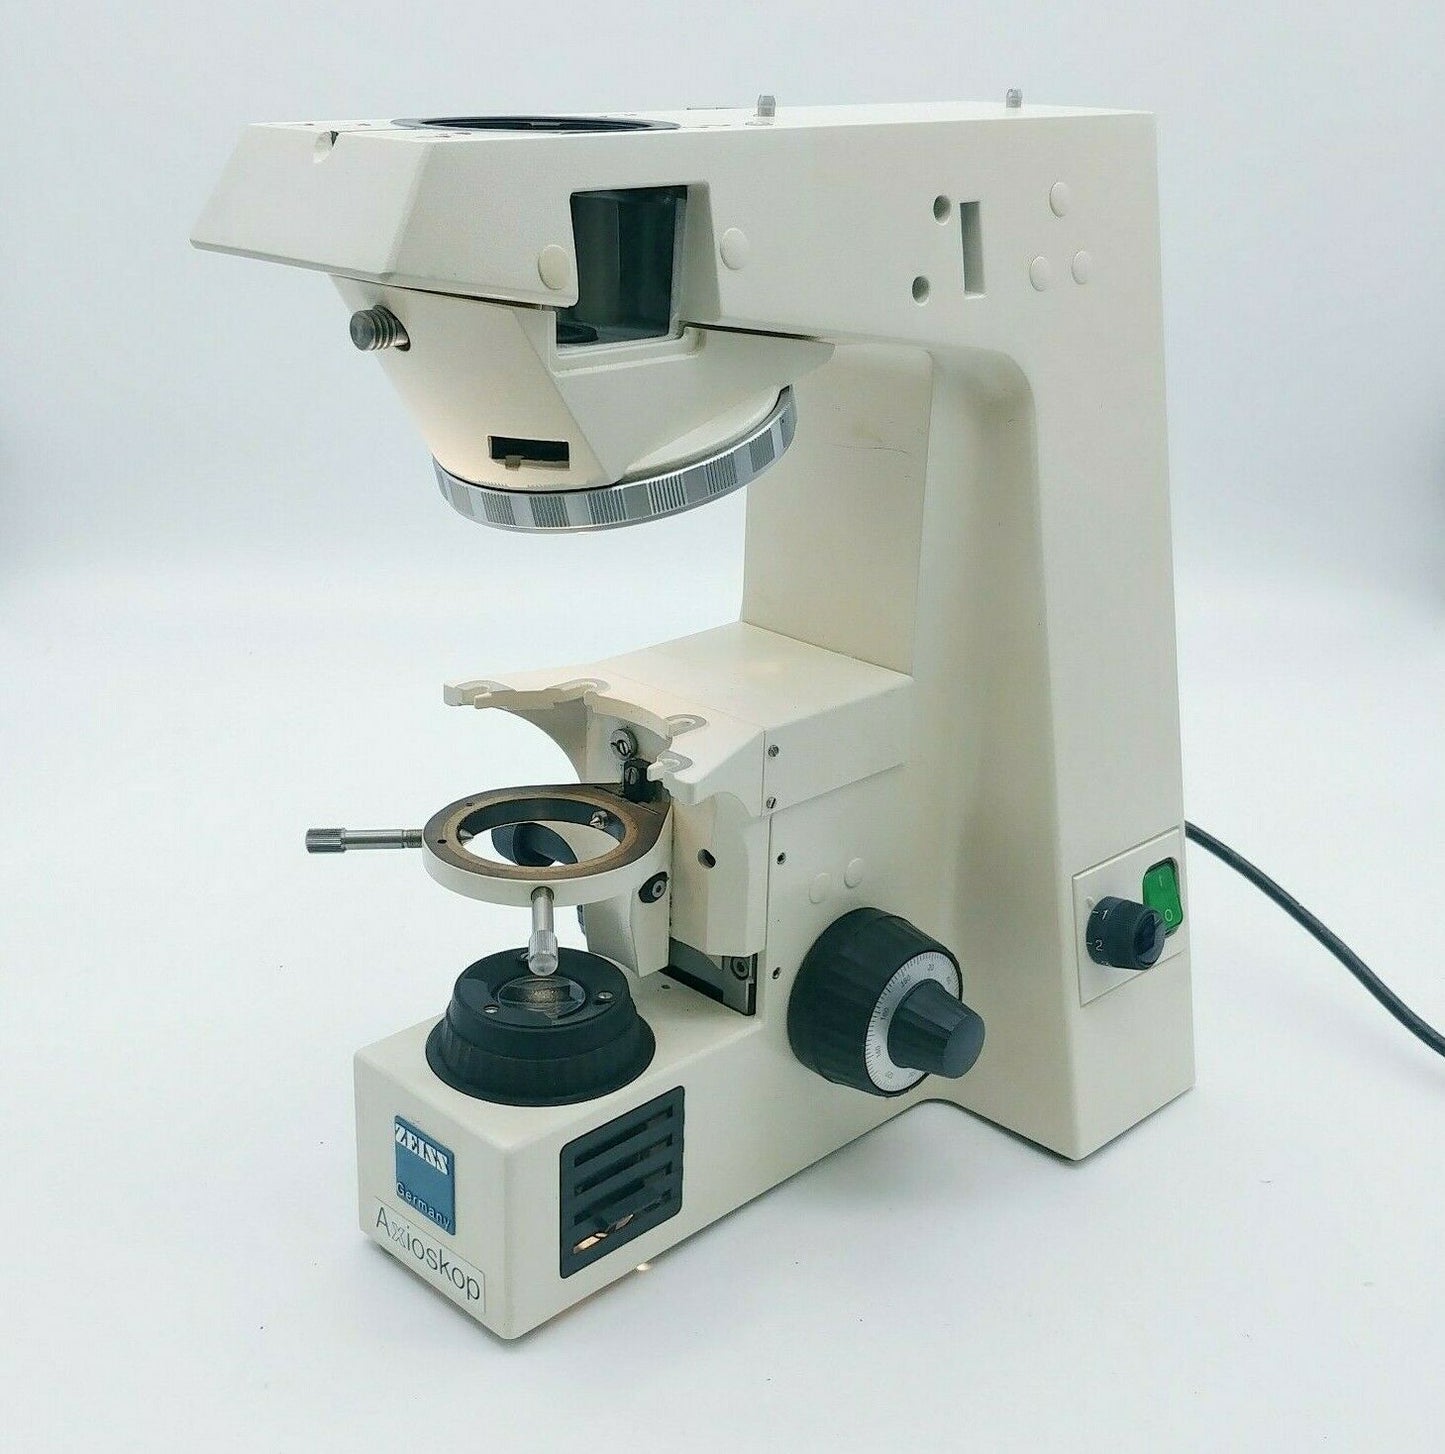 Zeiss Microscope Axioskop 20 Stand for Parts Electronics Nosepiece Focus - microscopemarketplace